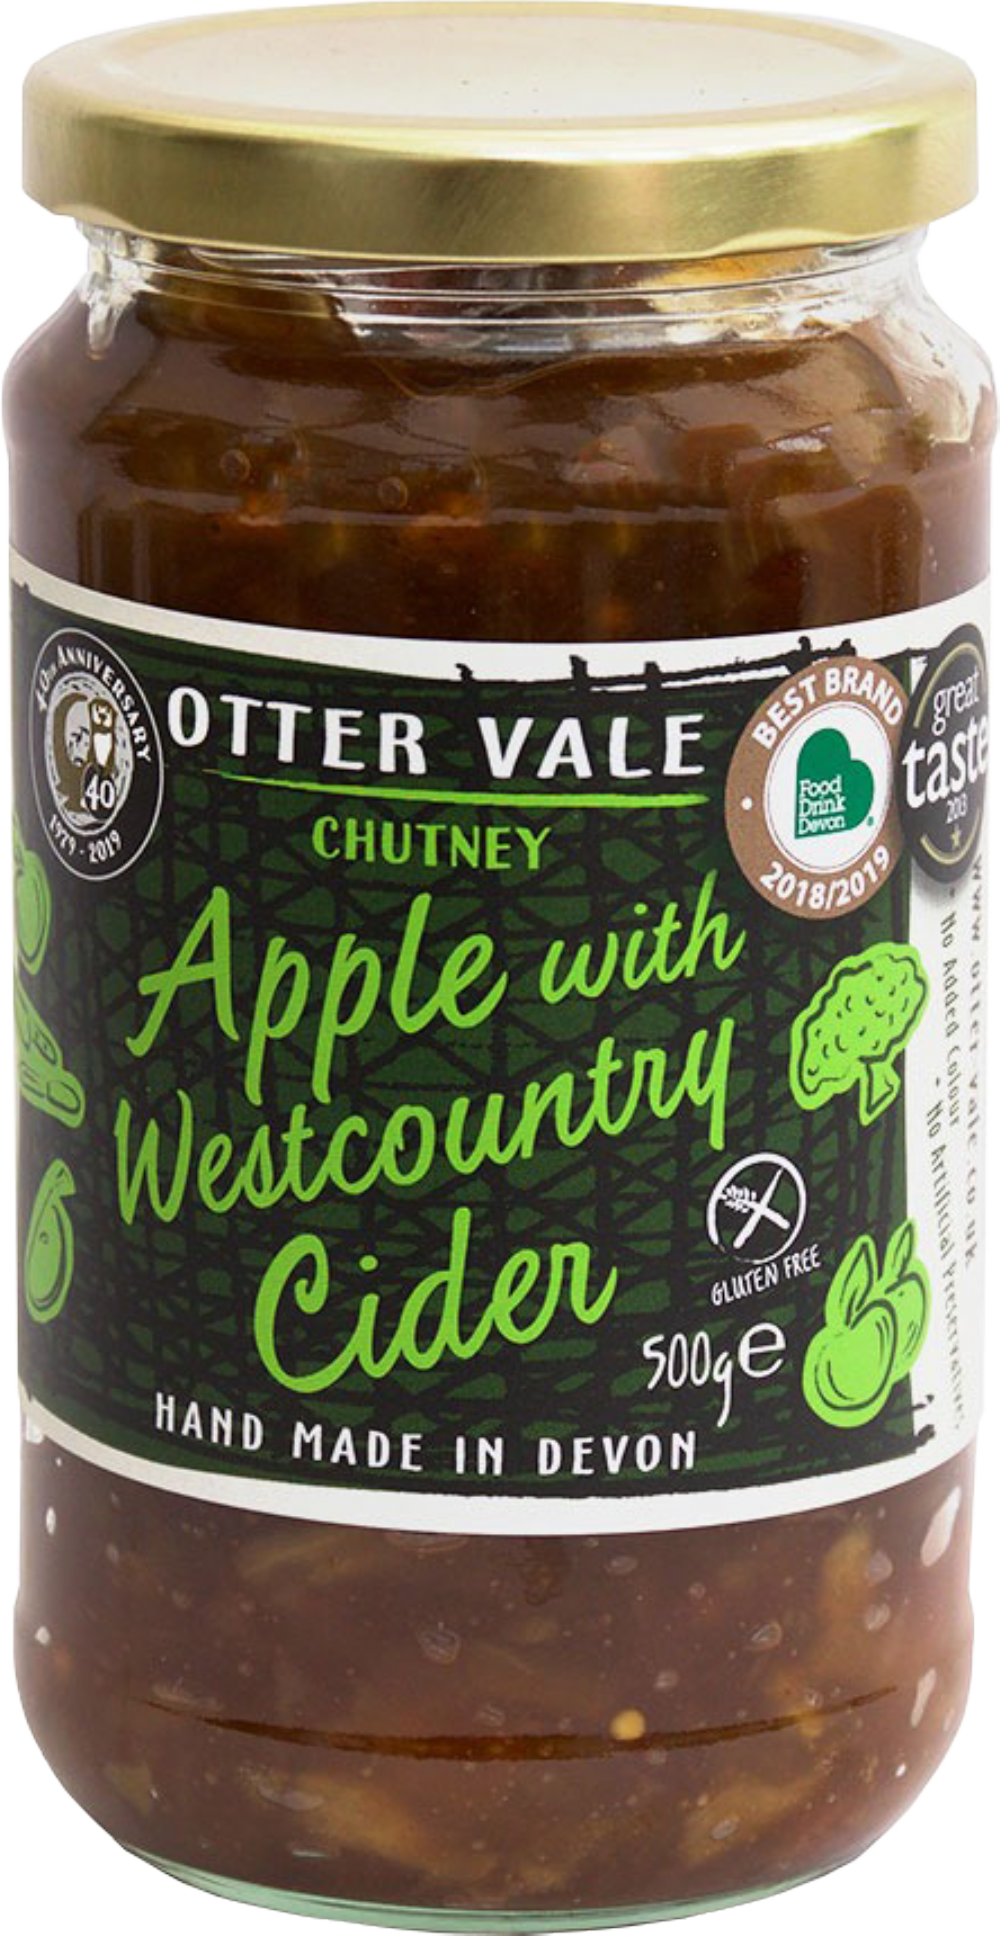 OTTER VALE Apple Chutney with West Country Cider 500g